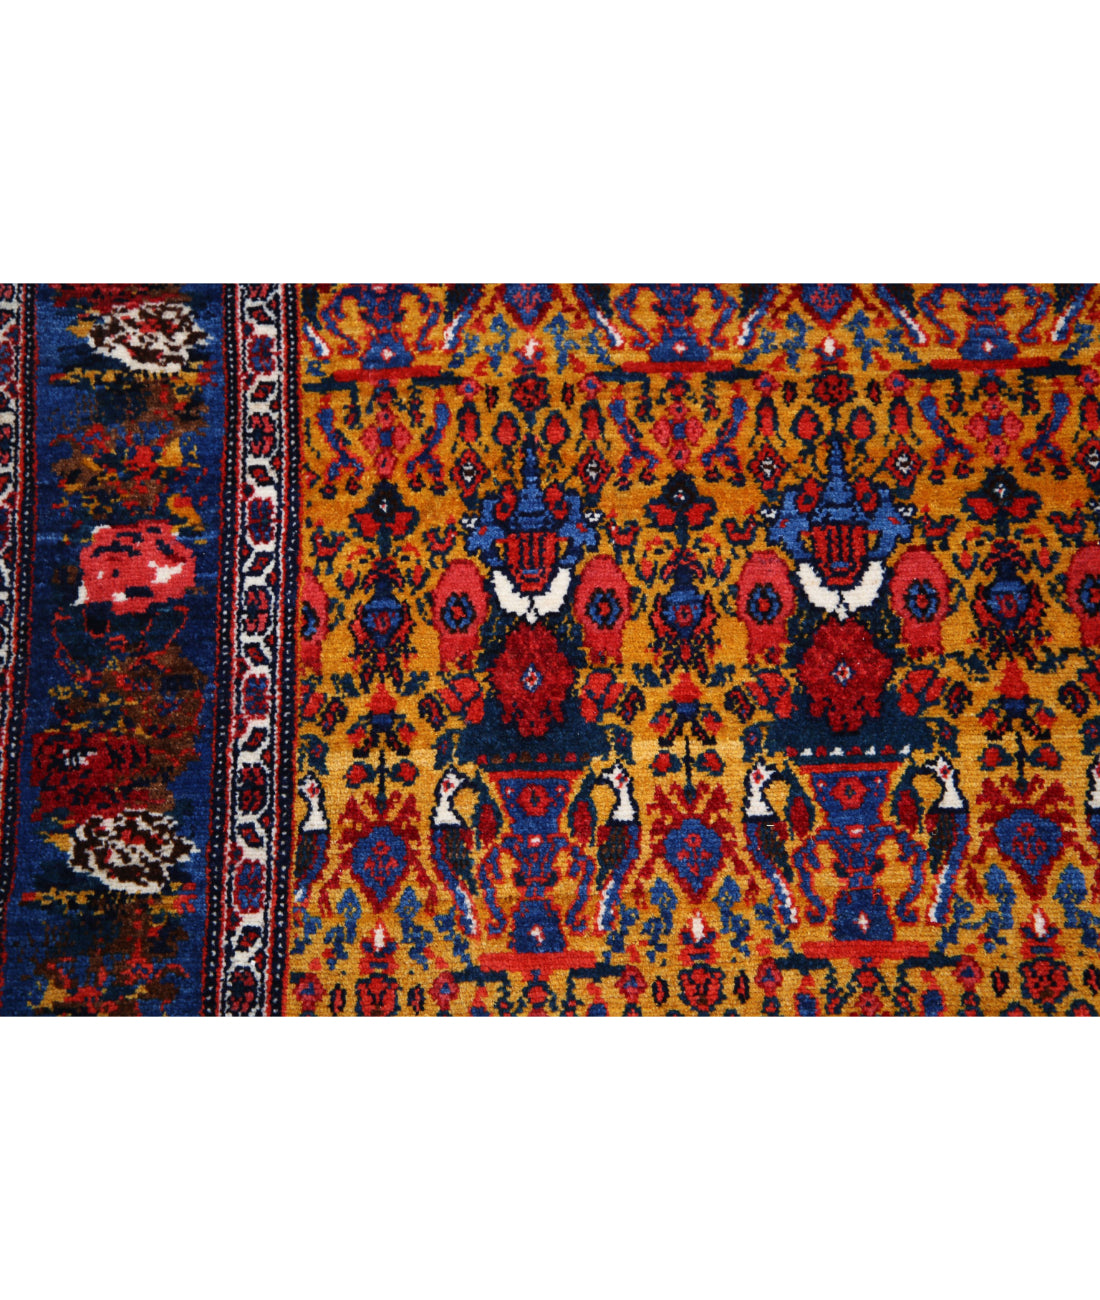 Hand Knotted Antique Persian Malayer Wool Rug - 5'4'' x 7'10'' 5'4'' x 7'10'' (160 X 235) / Gold / Blue